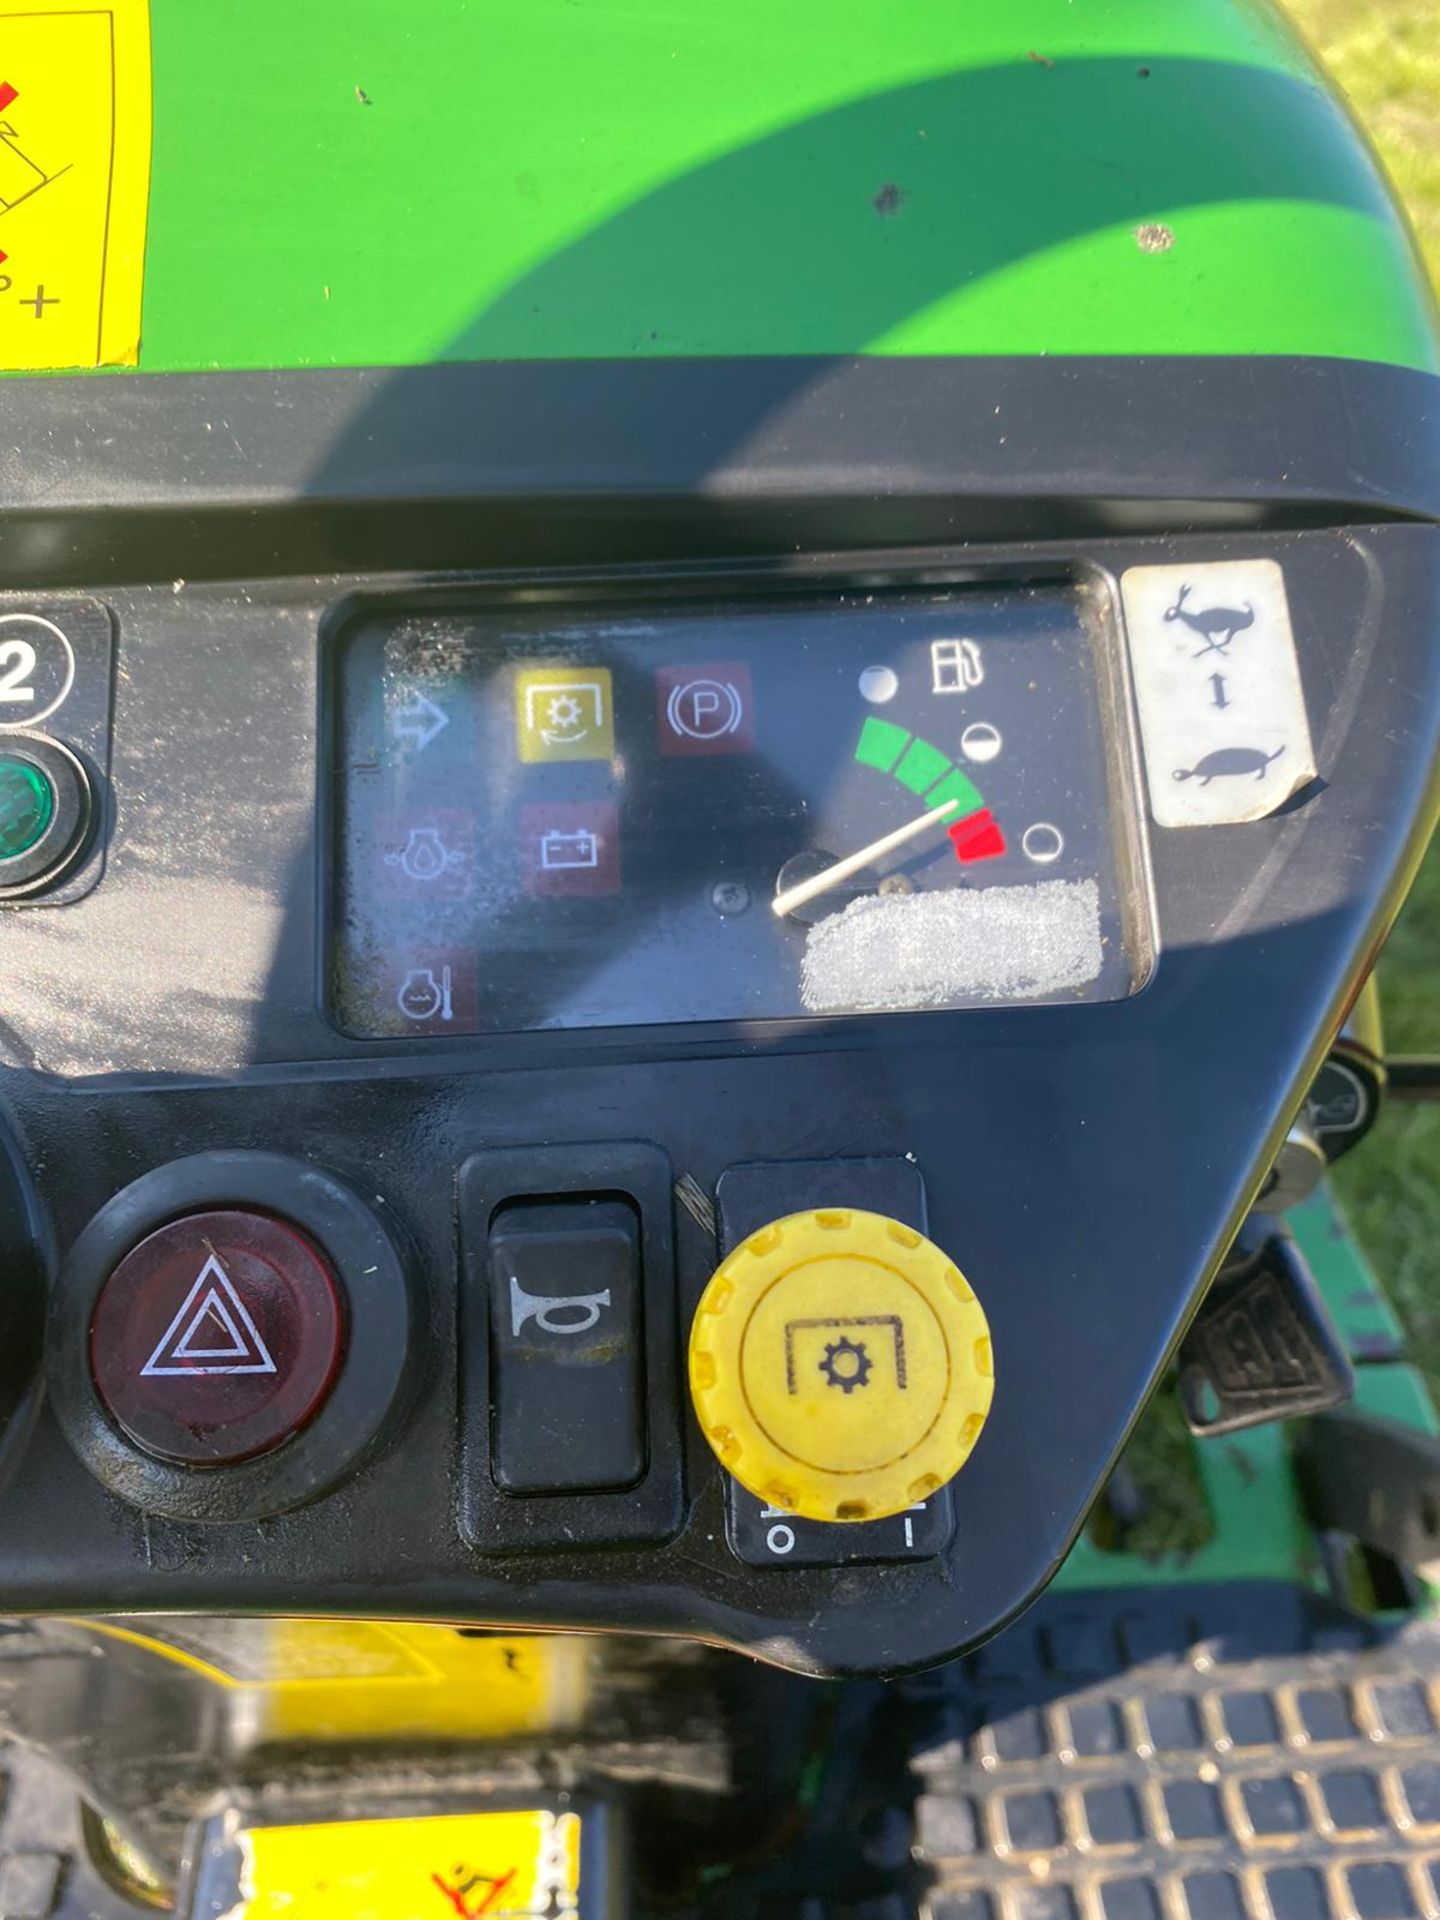 54 REG JOHN DEERE 4115 HYDROSTATIC COMPACT TRACTOR, RUNS, WORKS, DOES WHAT IT SHOULD *PLUS VAT* - Image 7 of 9